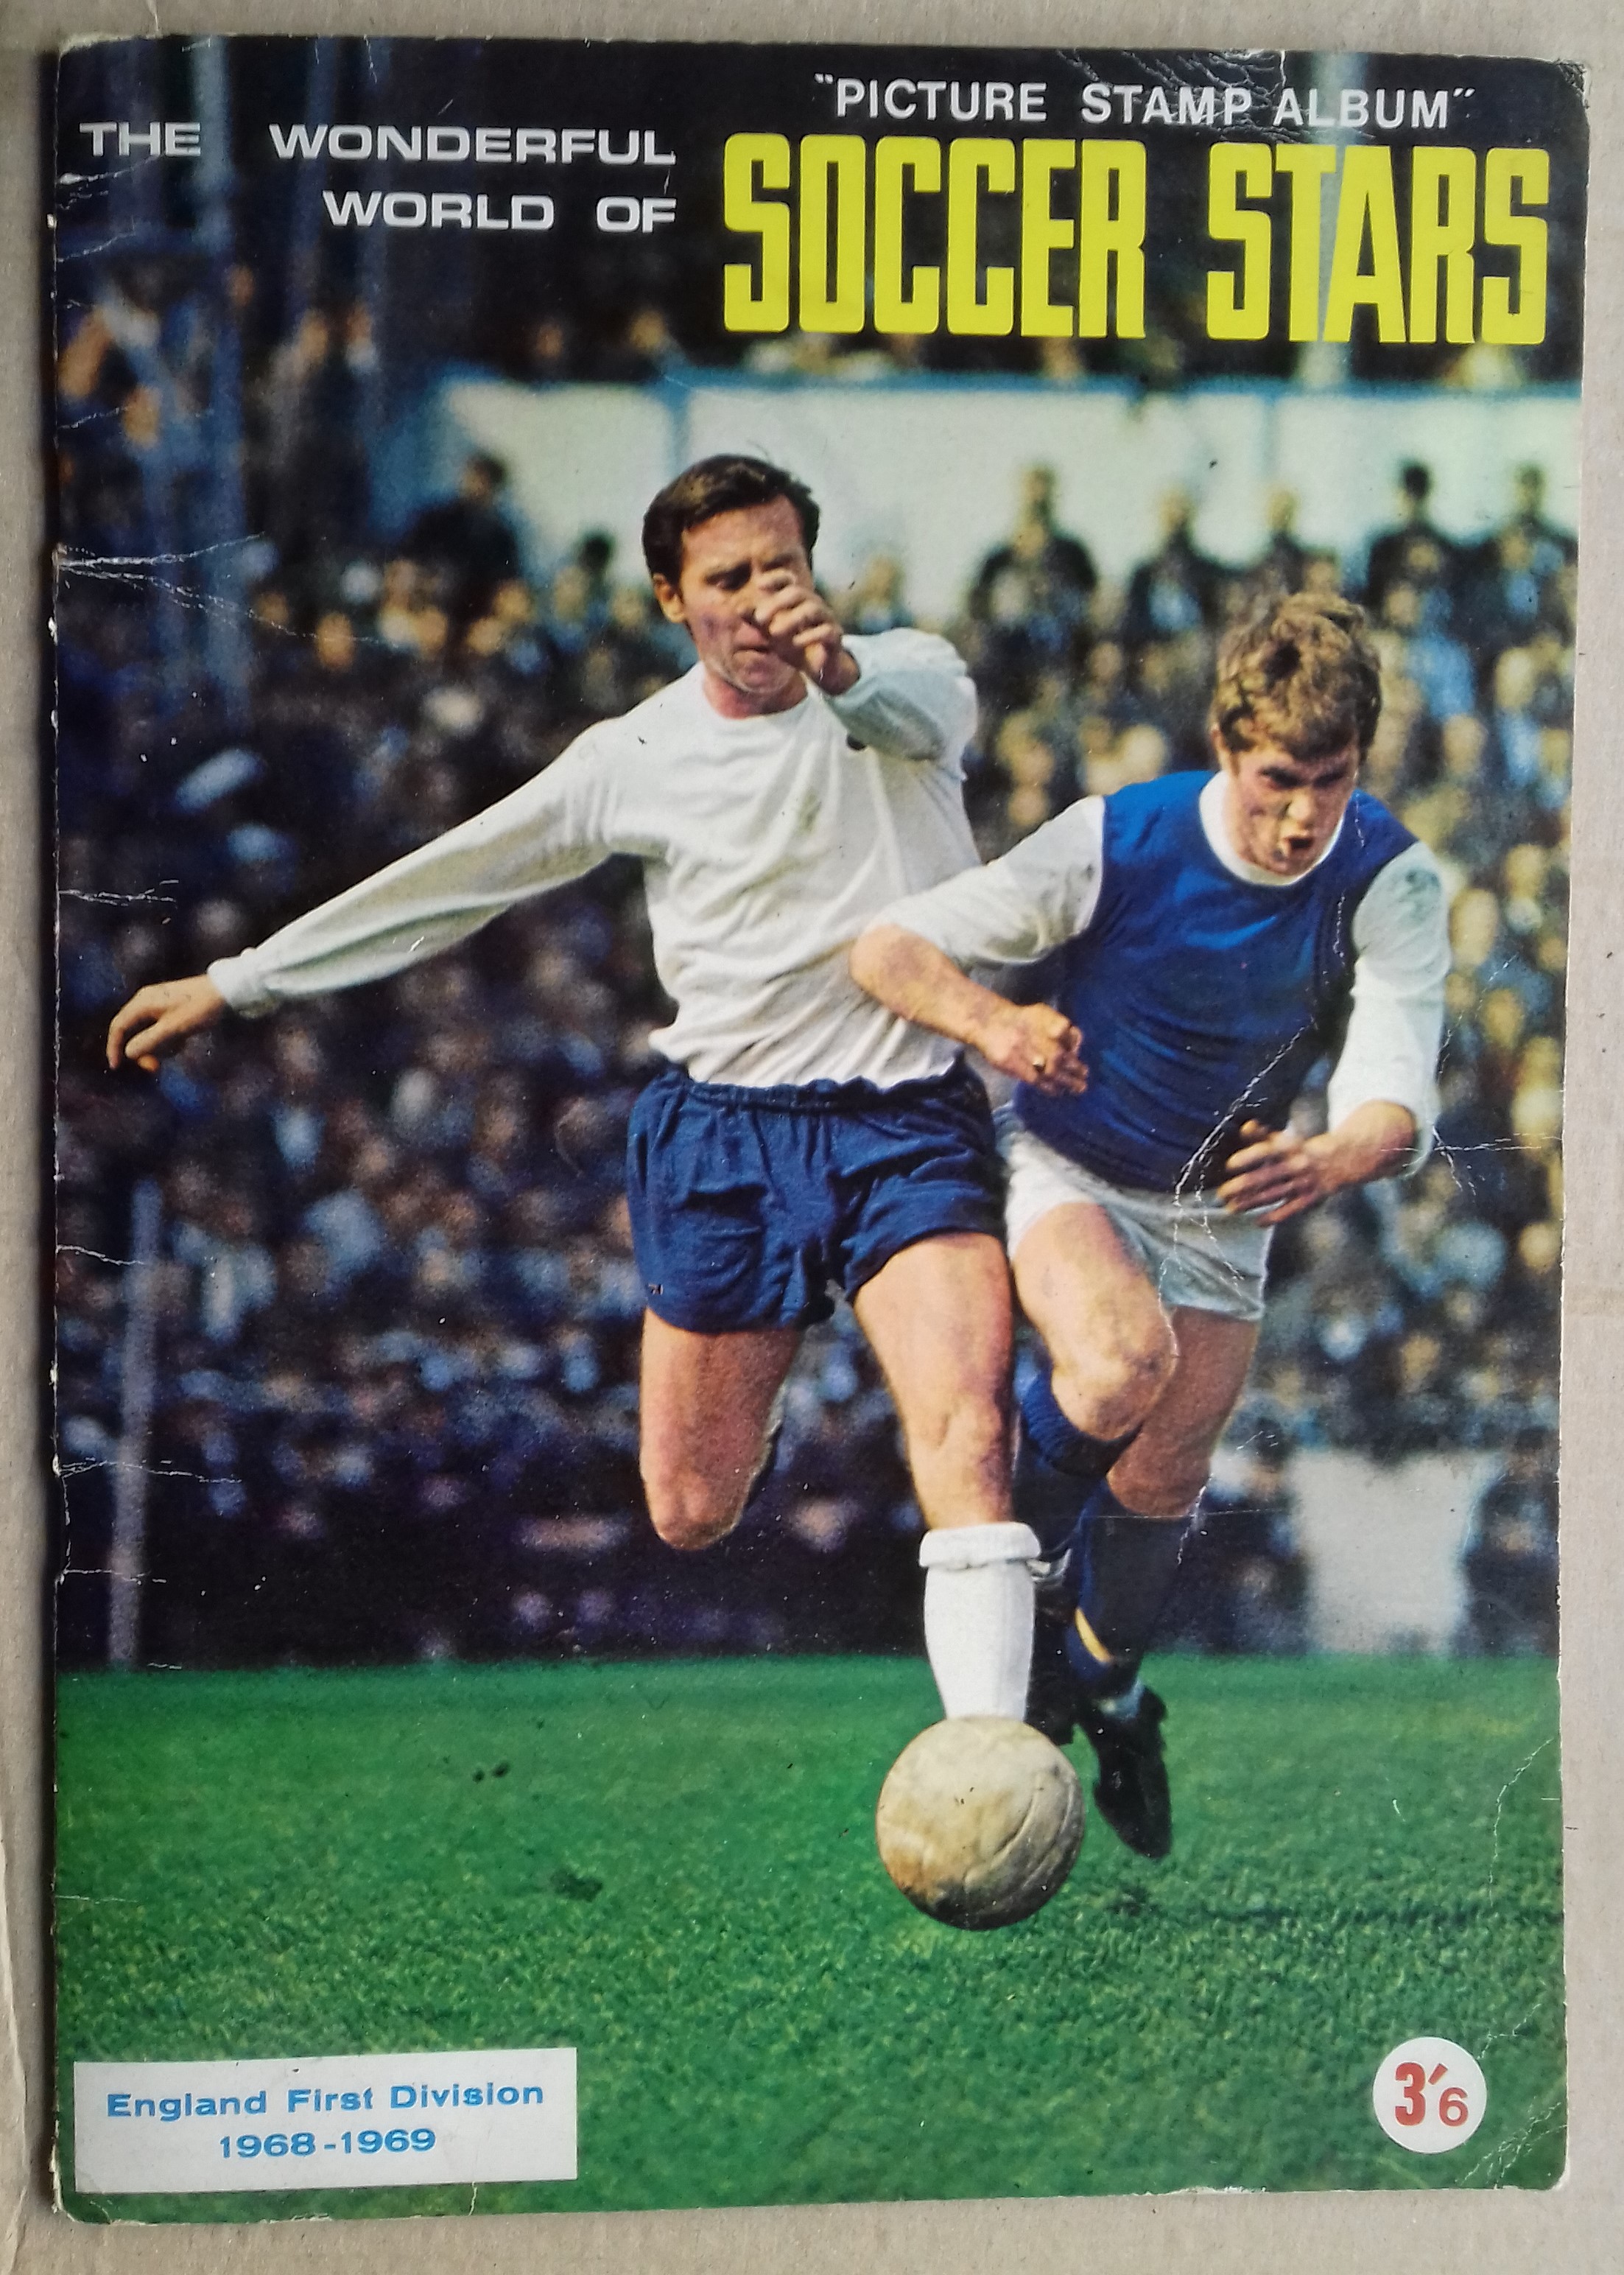 1968/69 SOCCER STARS ALBUM ARSENAL, CHELSEA, COVENTRY, MANCHESTER UNITED, WEST BROMWICH ALBION ETC.